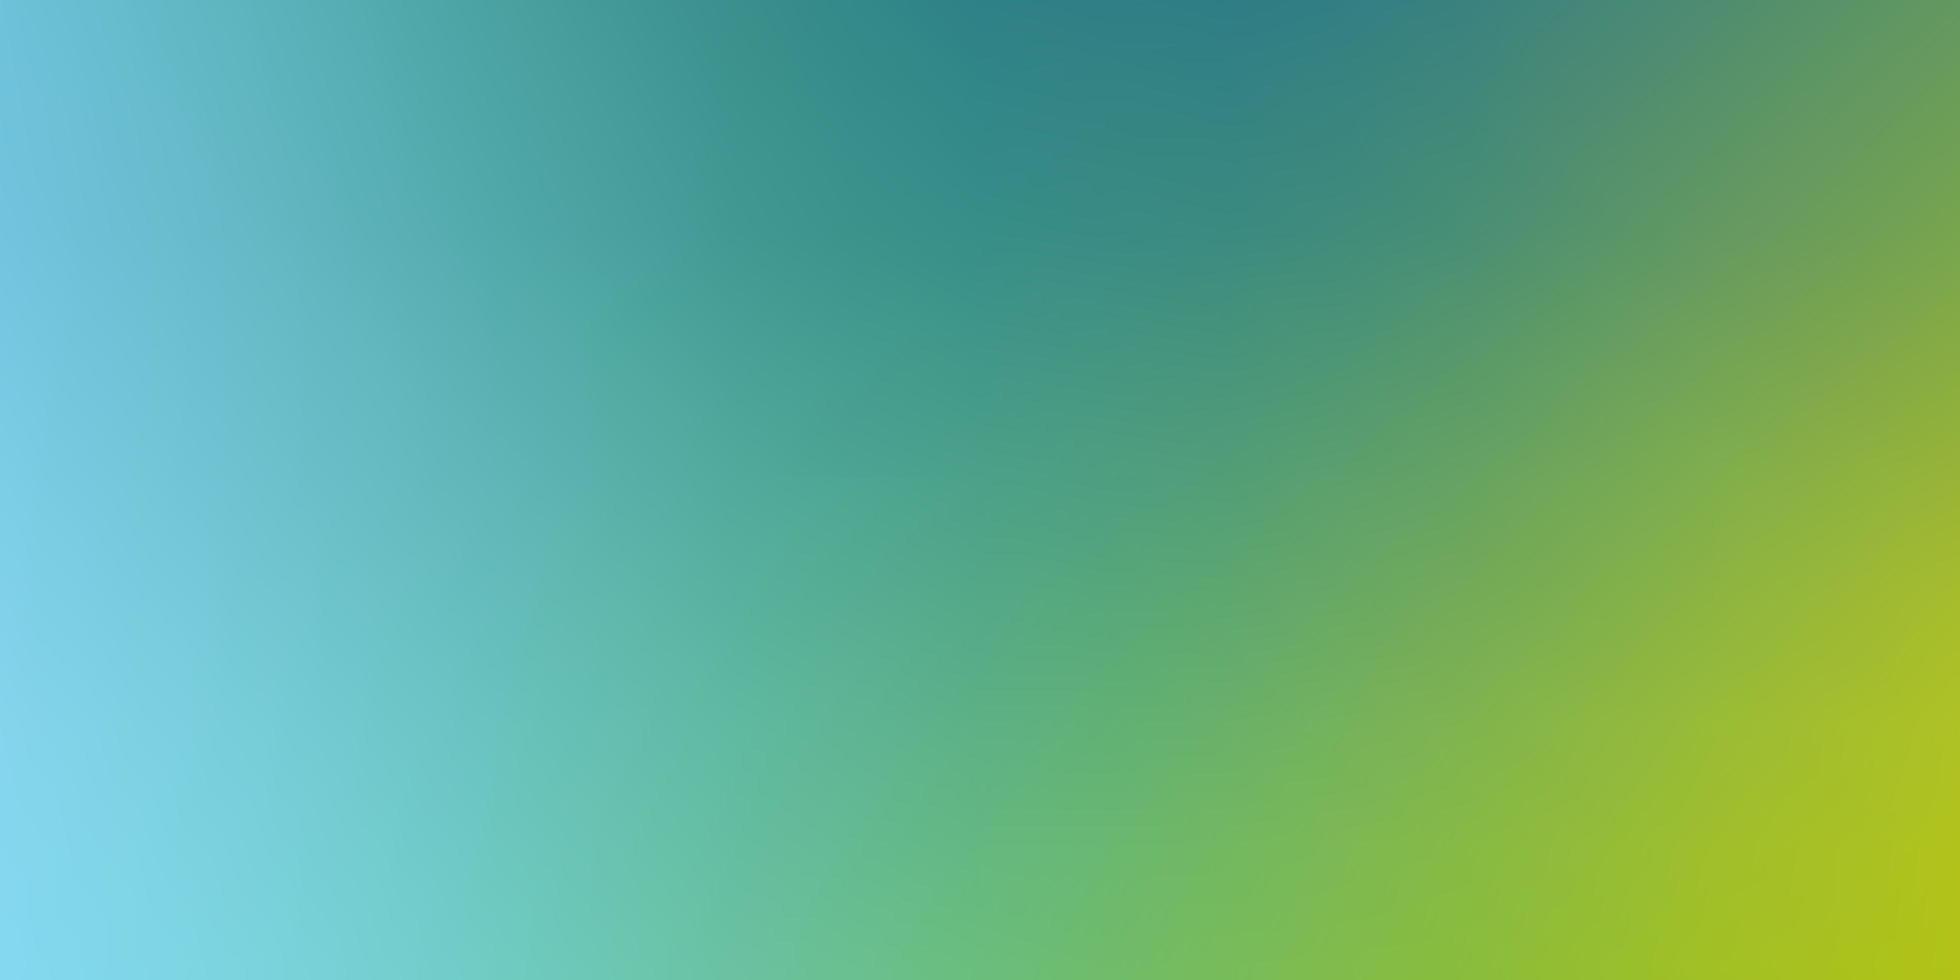 Light Blue Green vector abstract bright pattern Gradient abstract illustration with blurred colors Elegant background for websites